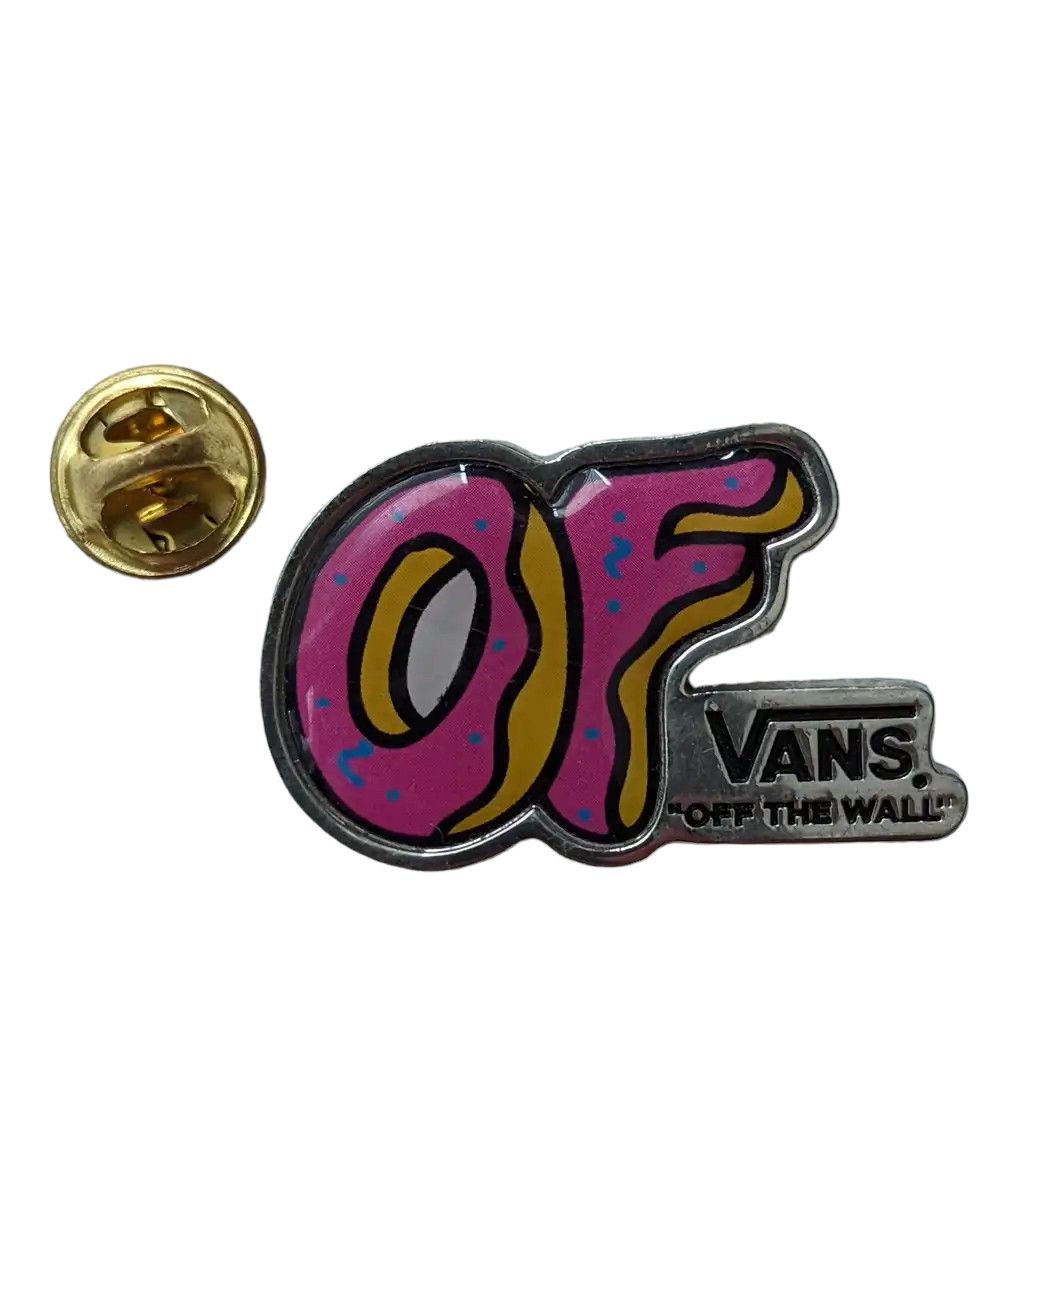 Pin on vans off the wall